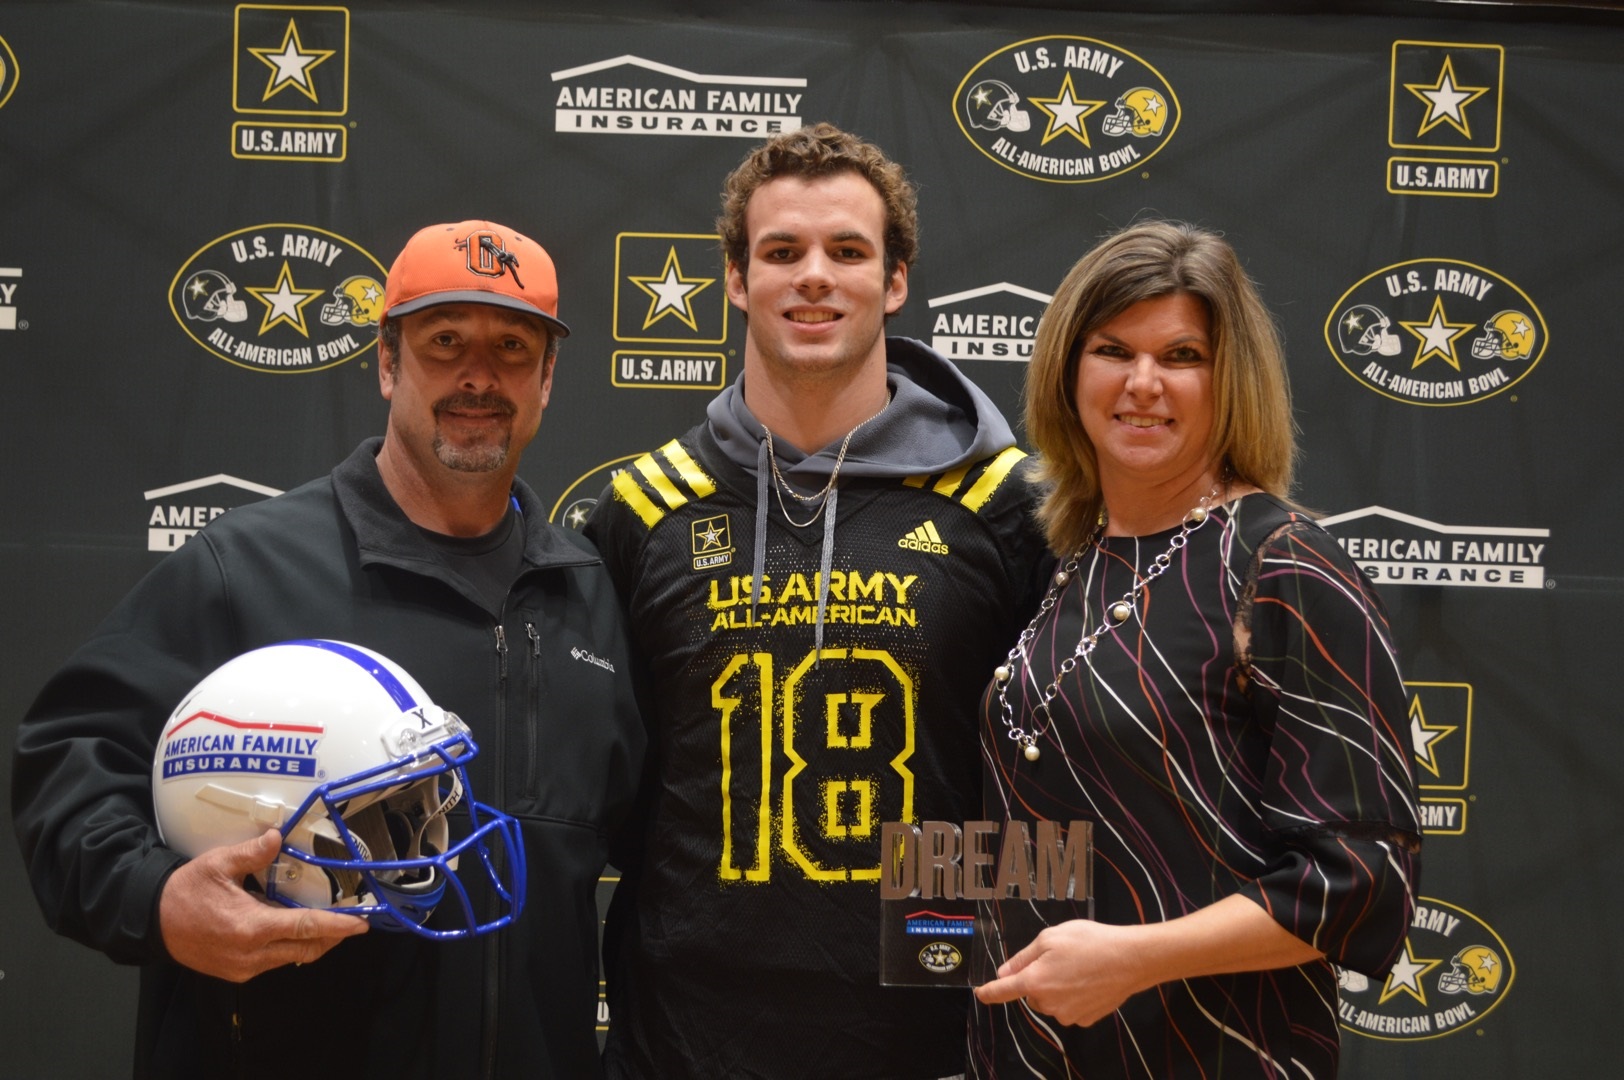 Payton Wilson is ready to breakout at U.S. Army AllAmerican Bowl